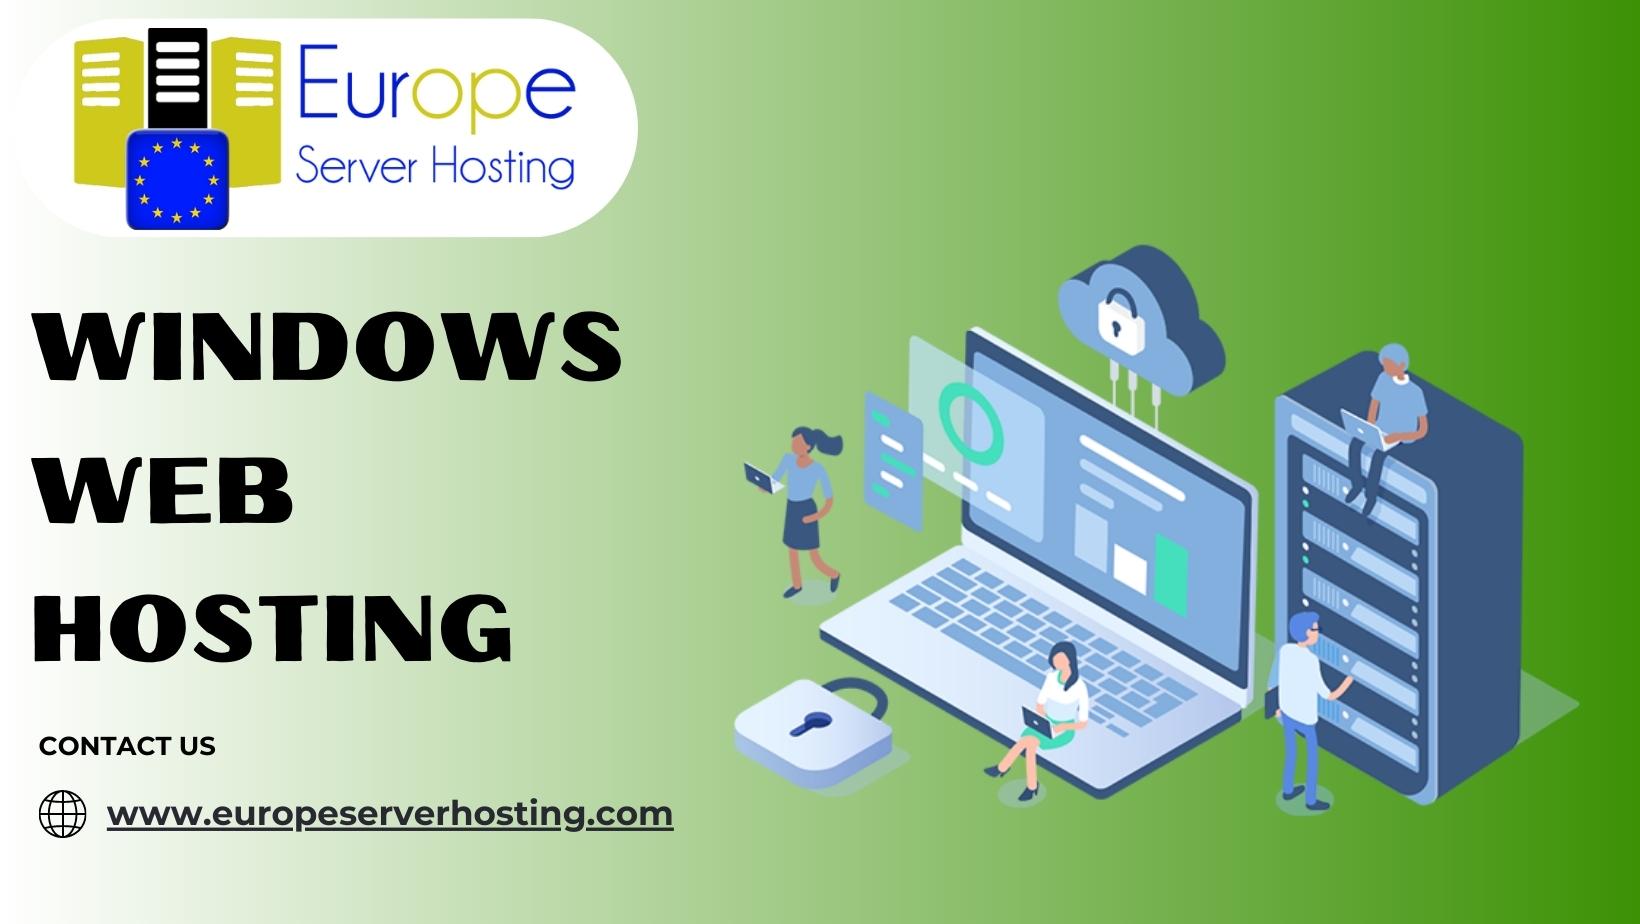 Windows Web Hosting is equipped to handle various databases, including MS SQL and Access databases. This opens up opportunities for dynamic content creation and efficient data management.